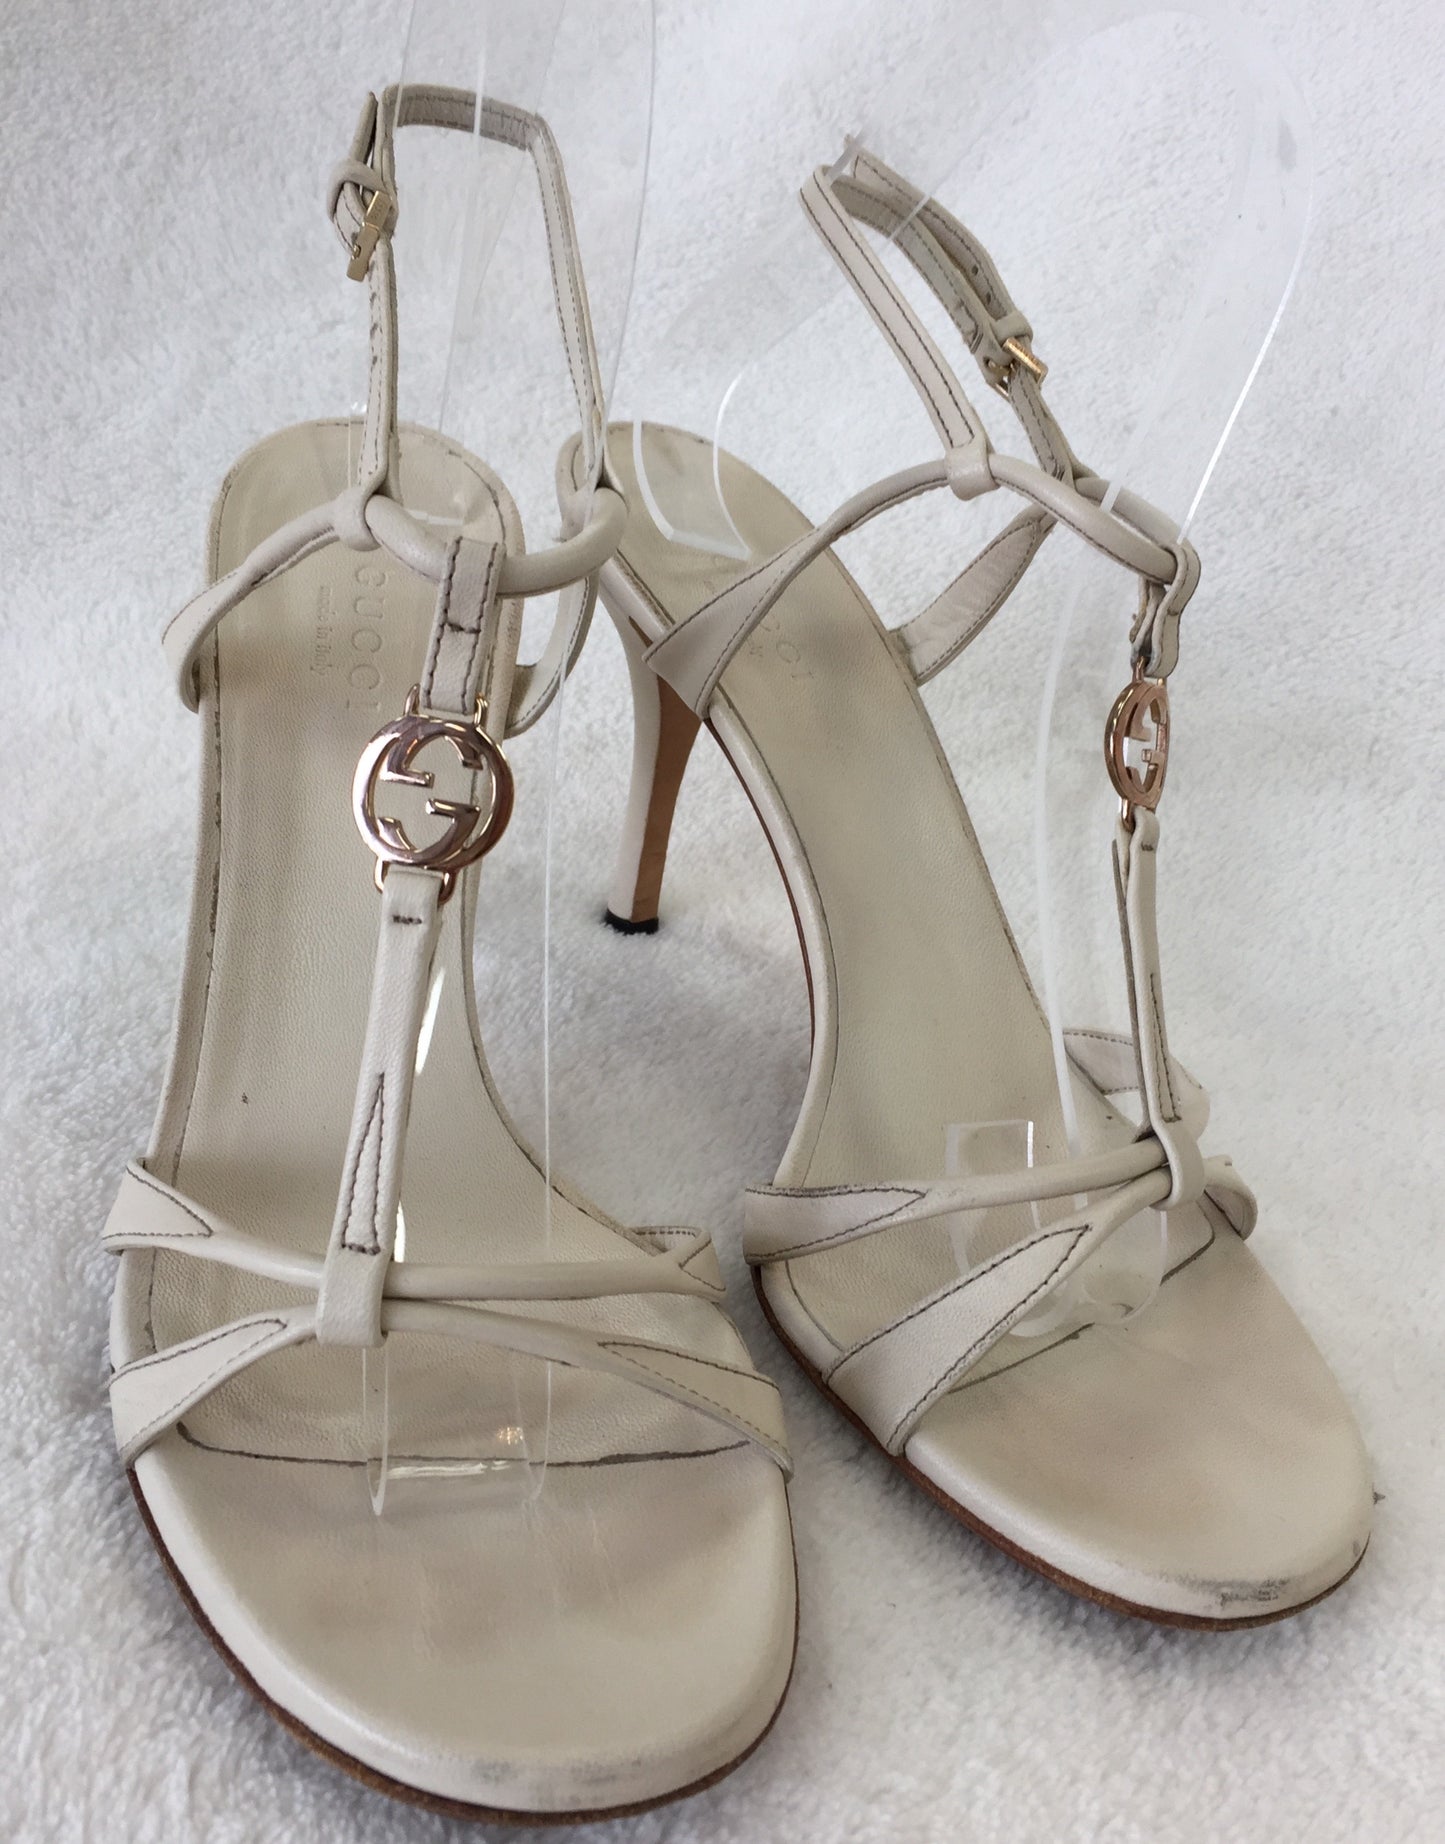 Authentic Gucci Ivory Leather Sandals Women's Size 37.5 / 7